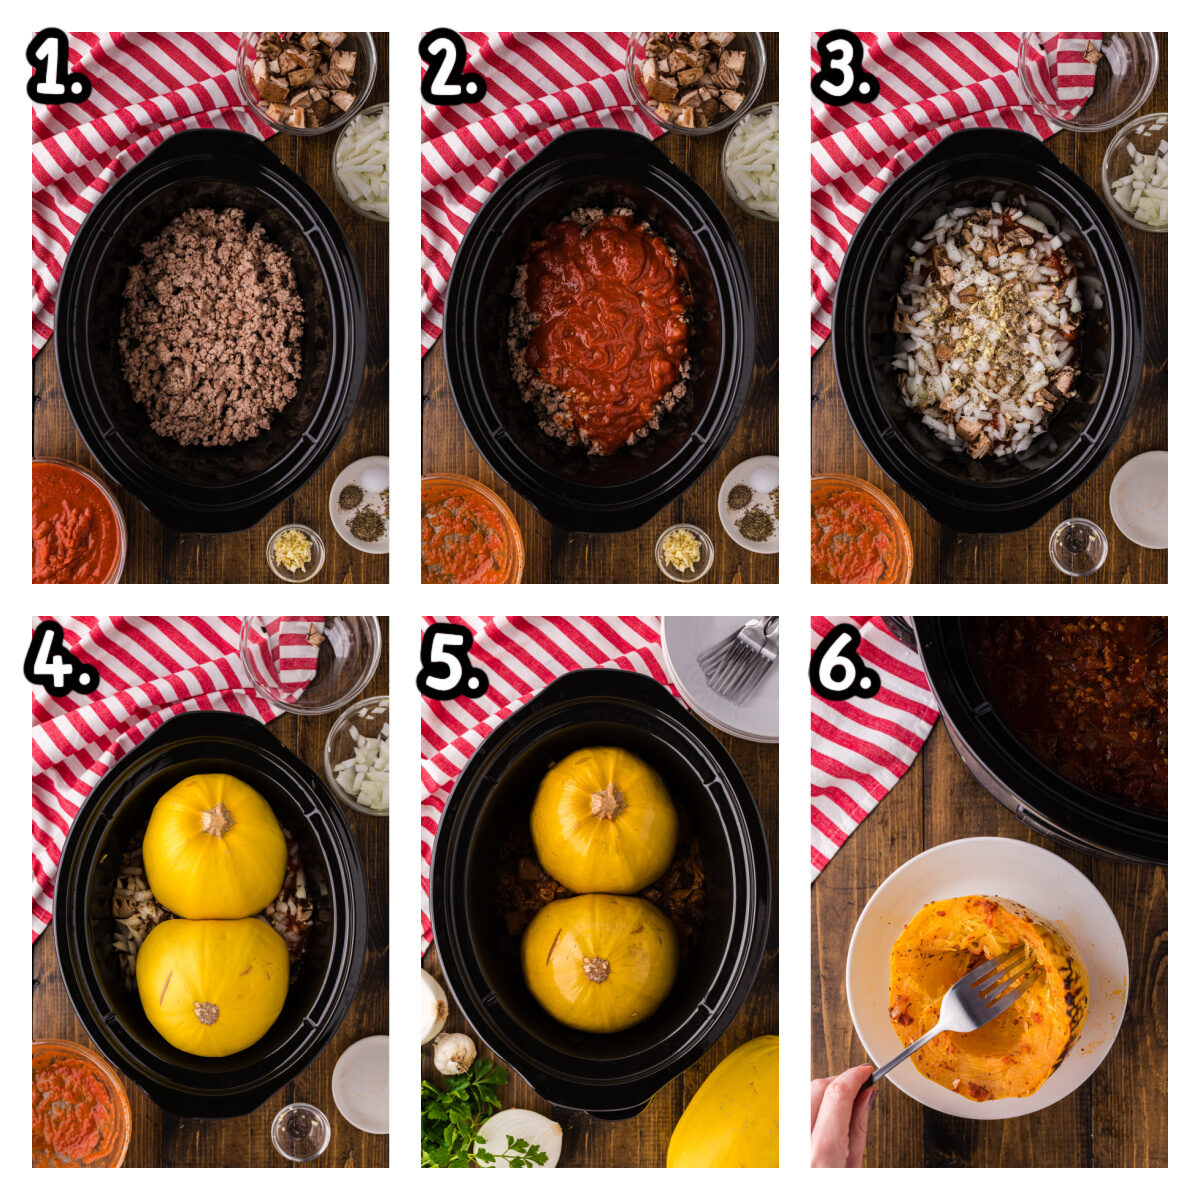 Six images showing how to make turkey meat sauce and spaghetti sauce in a slow cooker.